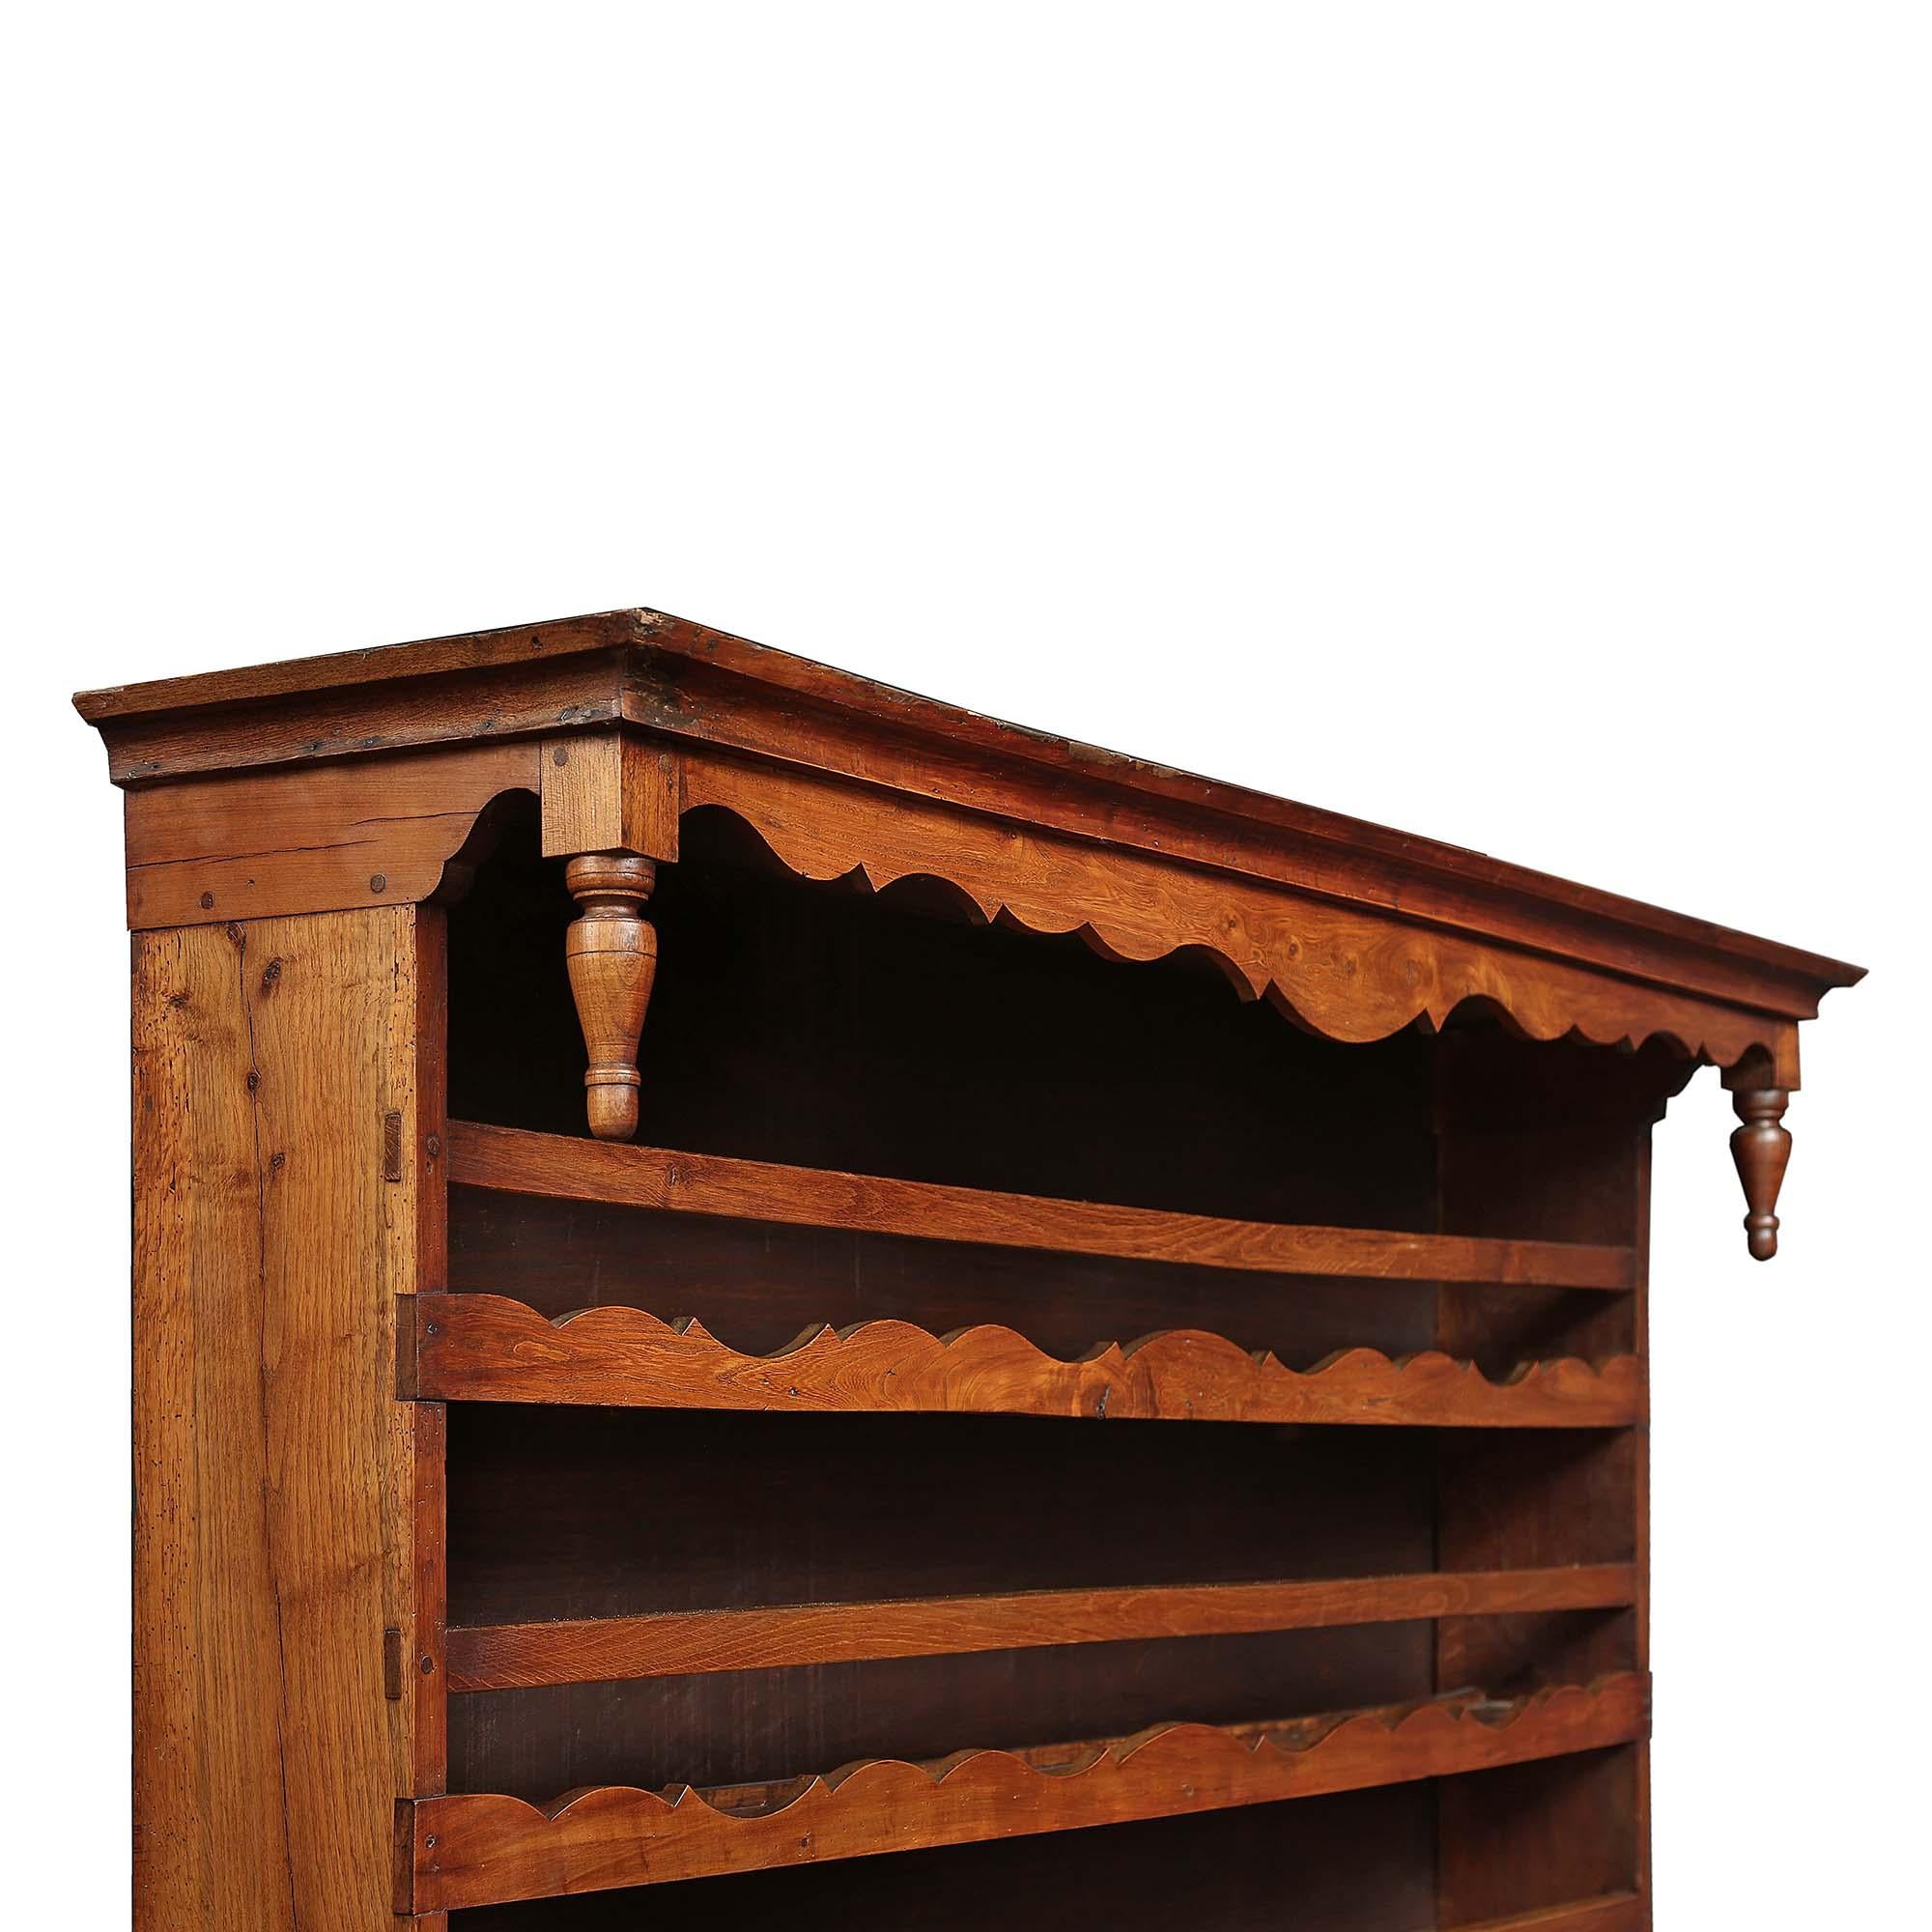 French 18th Century ‘Vaissellier’ in Walnut, Lemon Wood and Burl Walnut For Sale 1